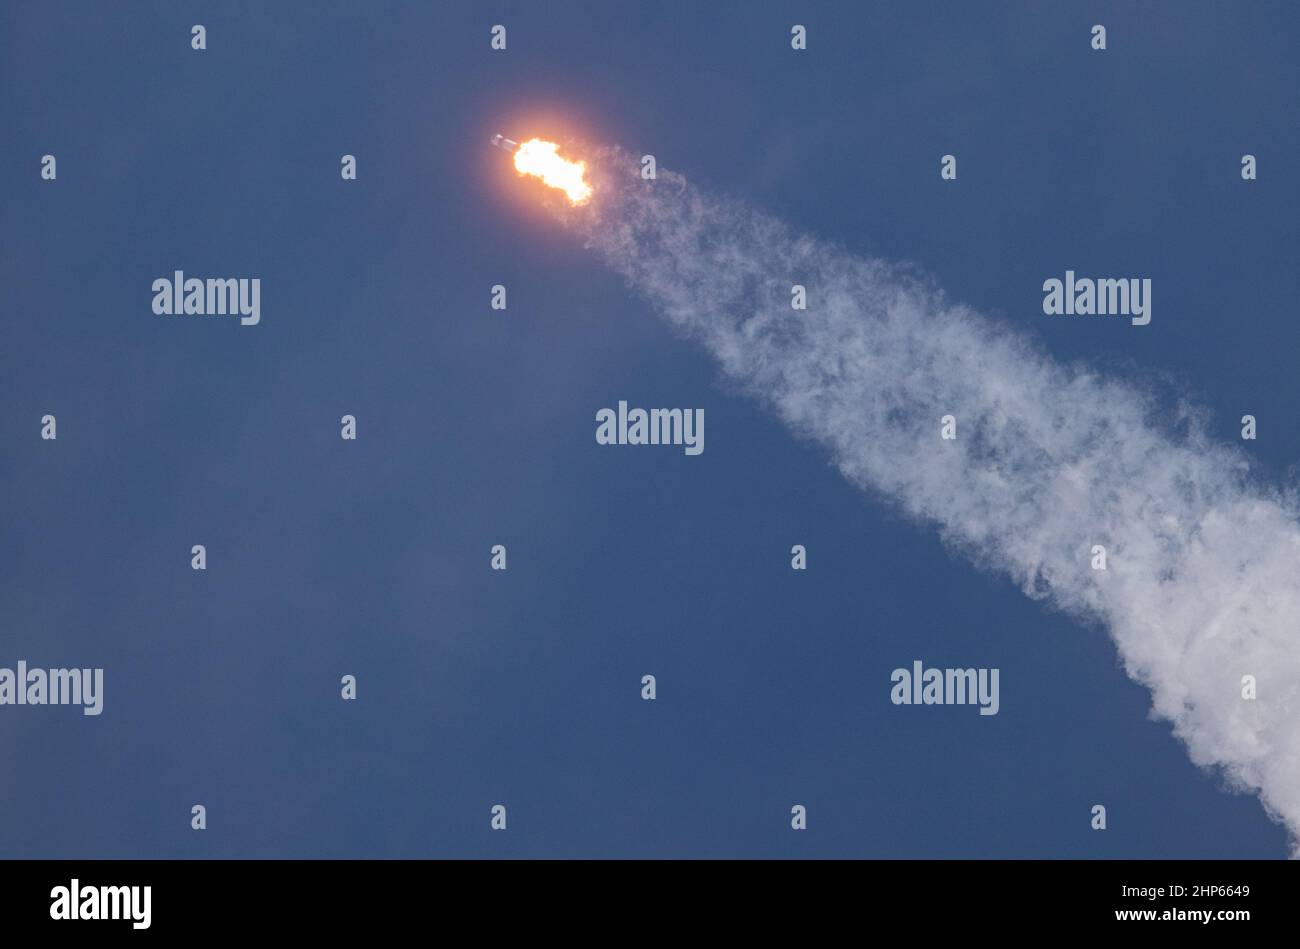 A SpaceX Falcon 9 rocket soars into the sky after lifting off from Launch Complex 39A at Kennedy Space Center in Florida at 11:17 a.m. EST on Dec. 6, 2020. Stock Photo